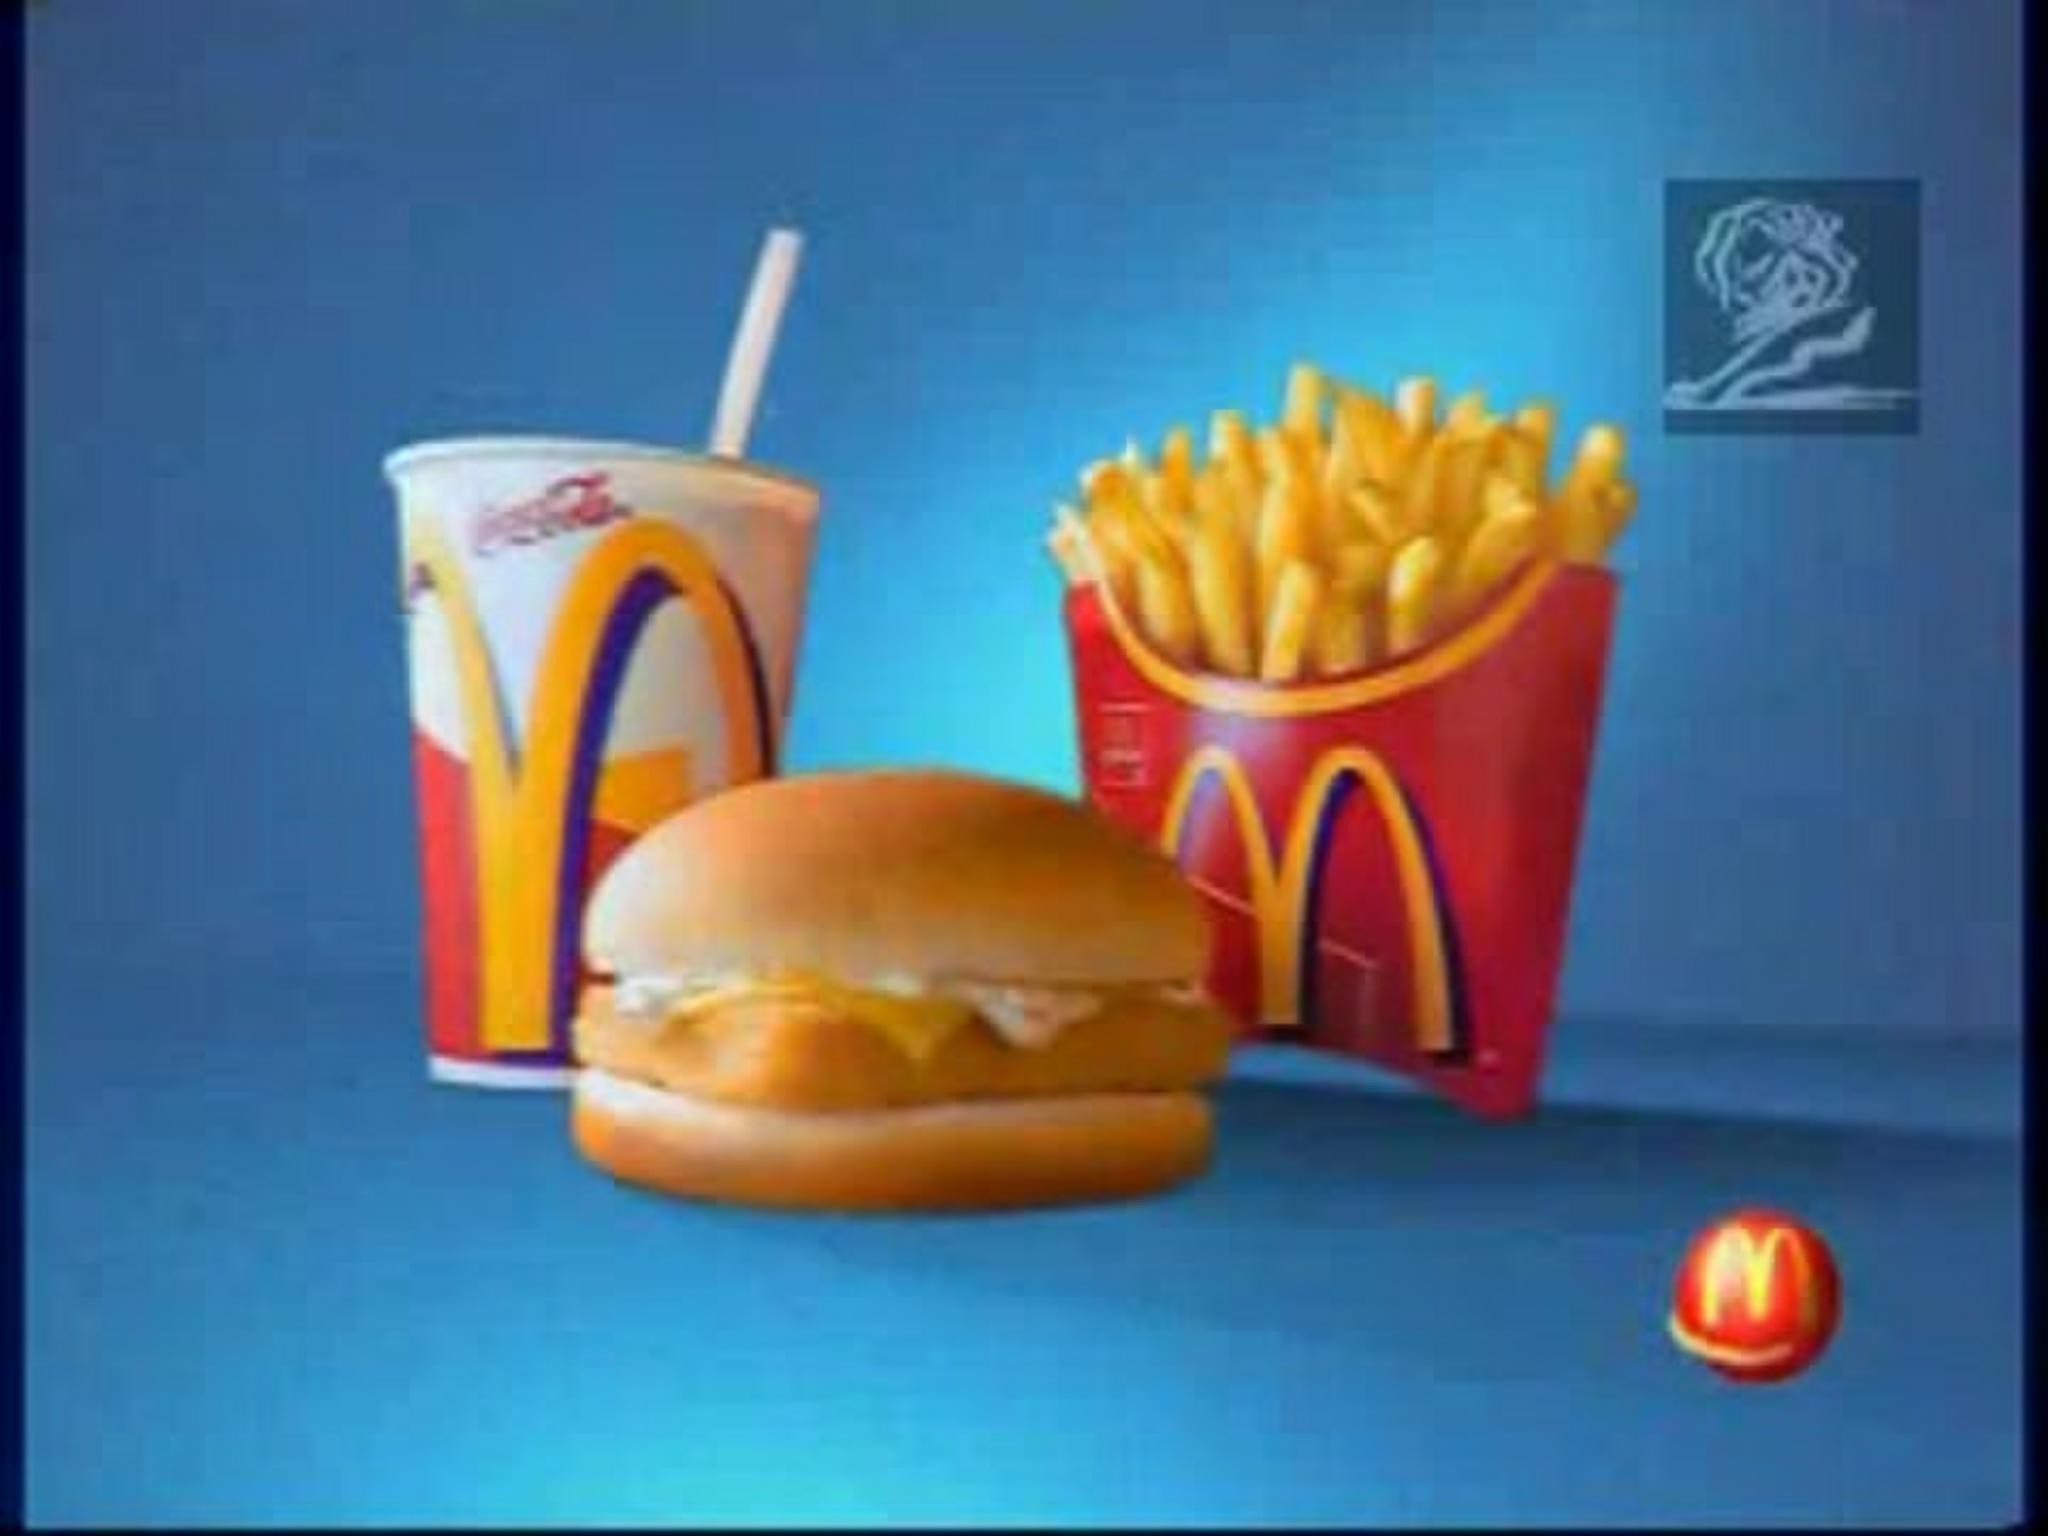 McDONALD'S EXTRA VALUE MEAL